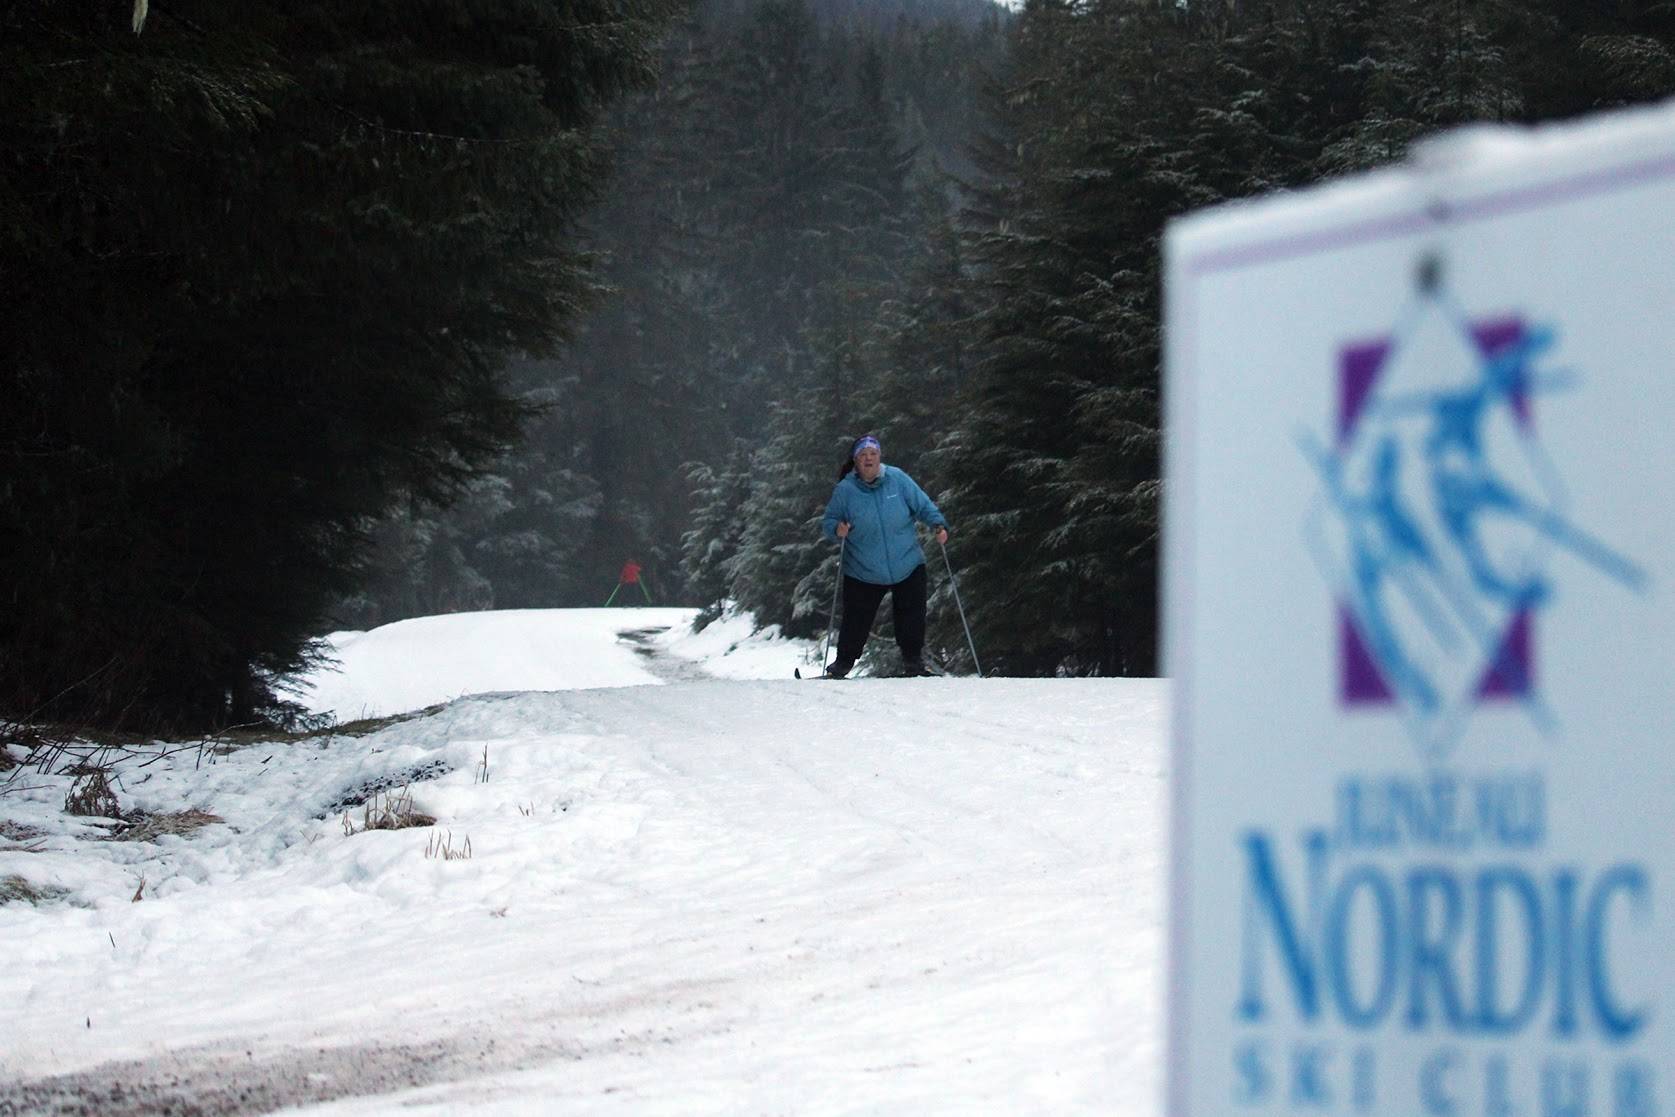 Allison Smith, a member of the Juneau Nordic Ski Club, passes another skier on her way along Montana Creek Road. Ski trails around Juneau will soon be hiding clues for Juneau Nordic Ski Club's ski-o’cache event. (Ben Hohenstatt/Juneau Empire)